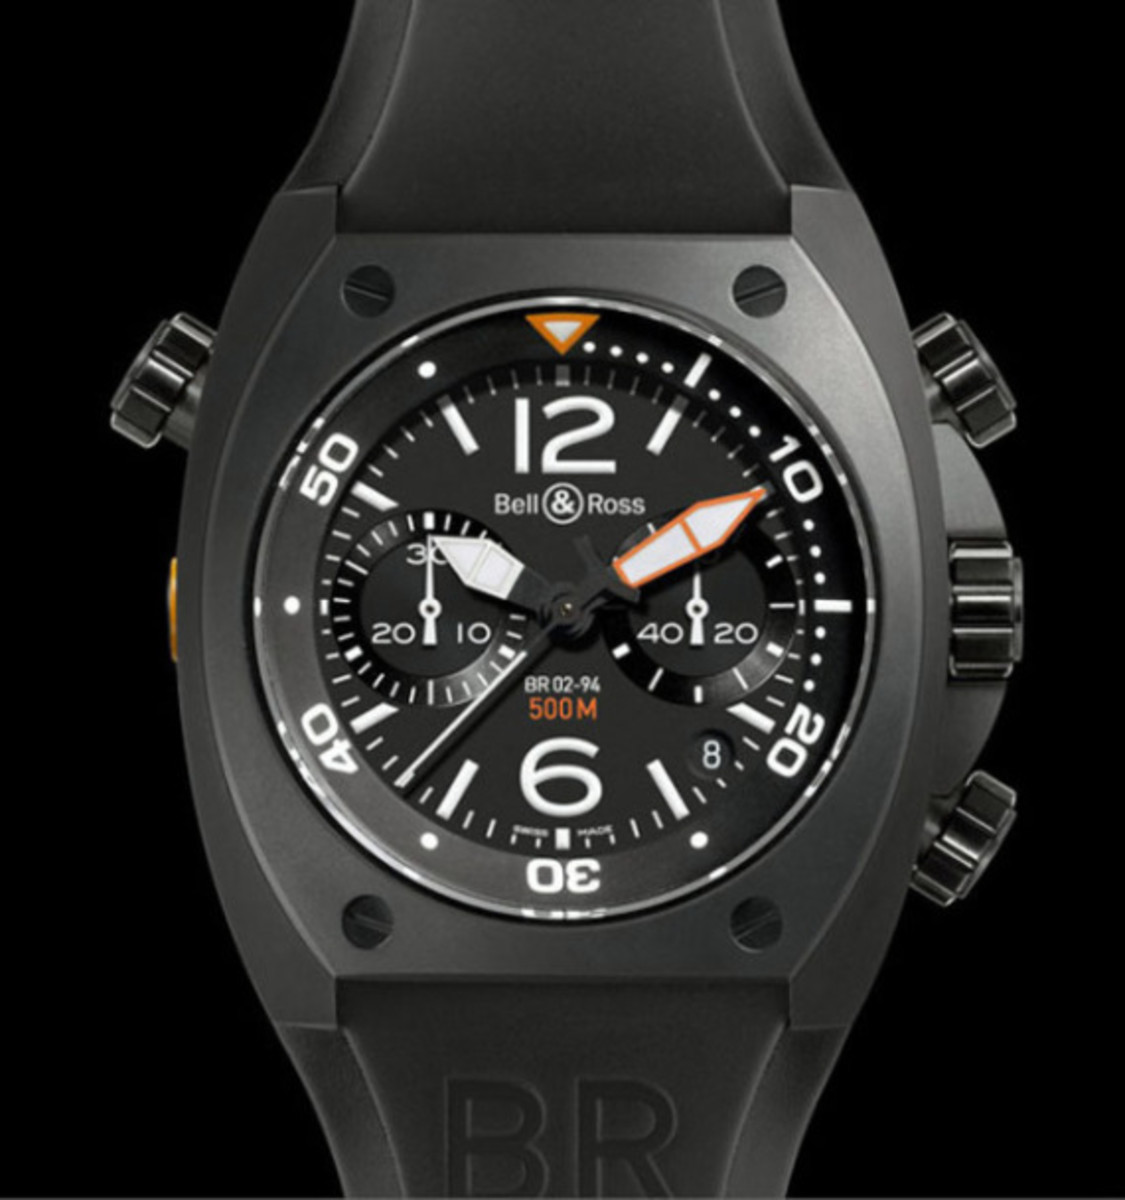 Bell and Ross watches